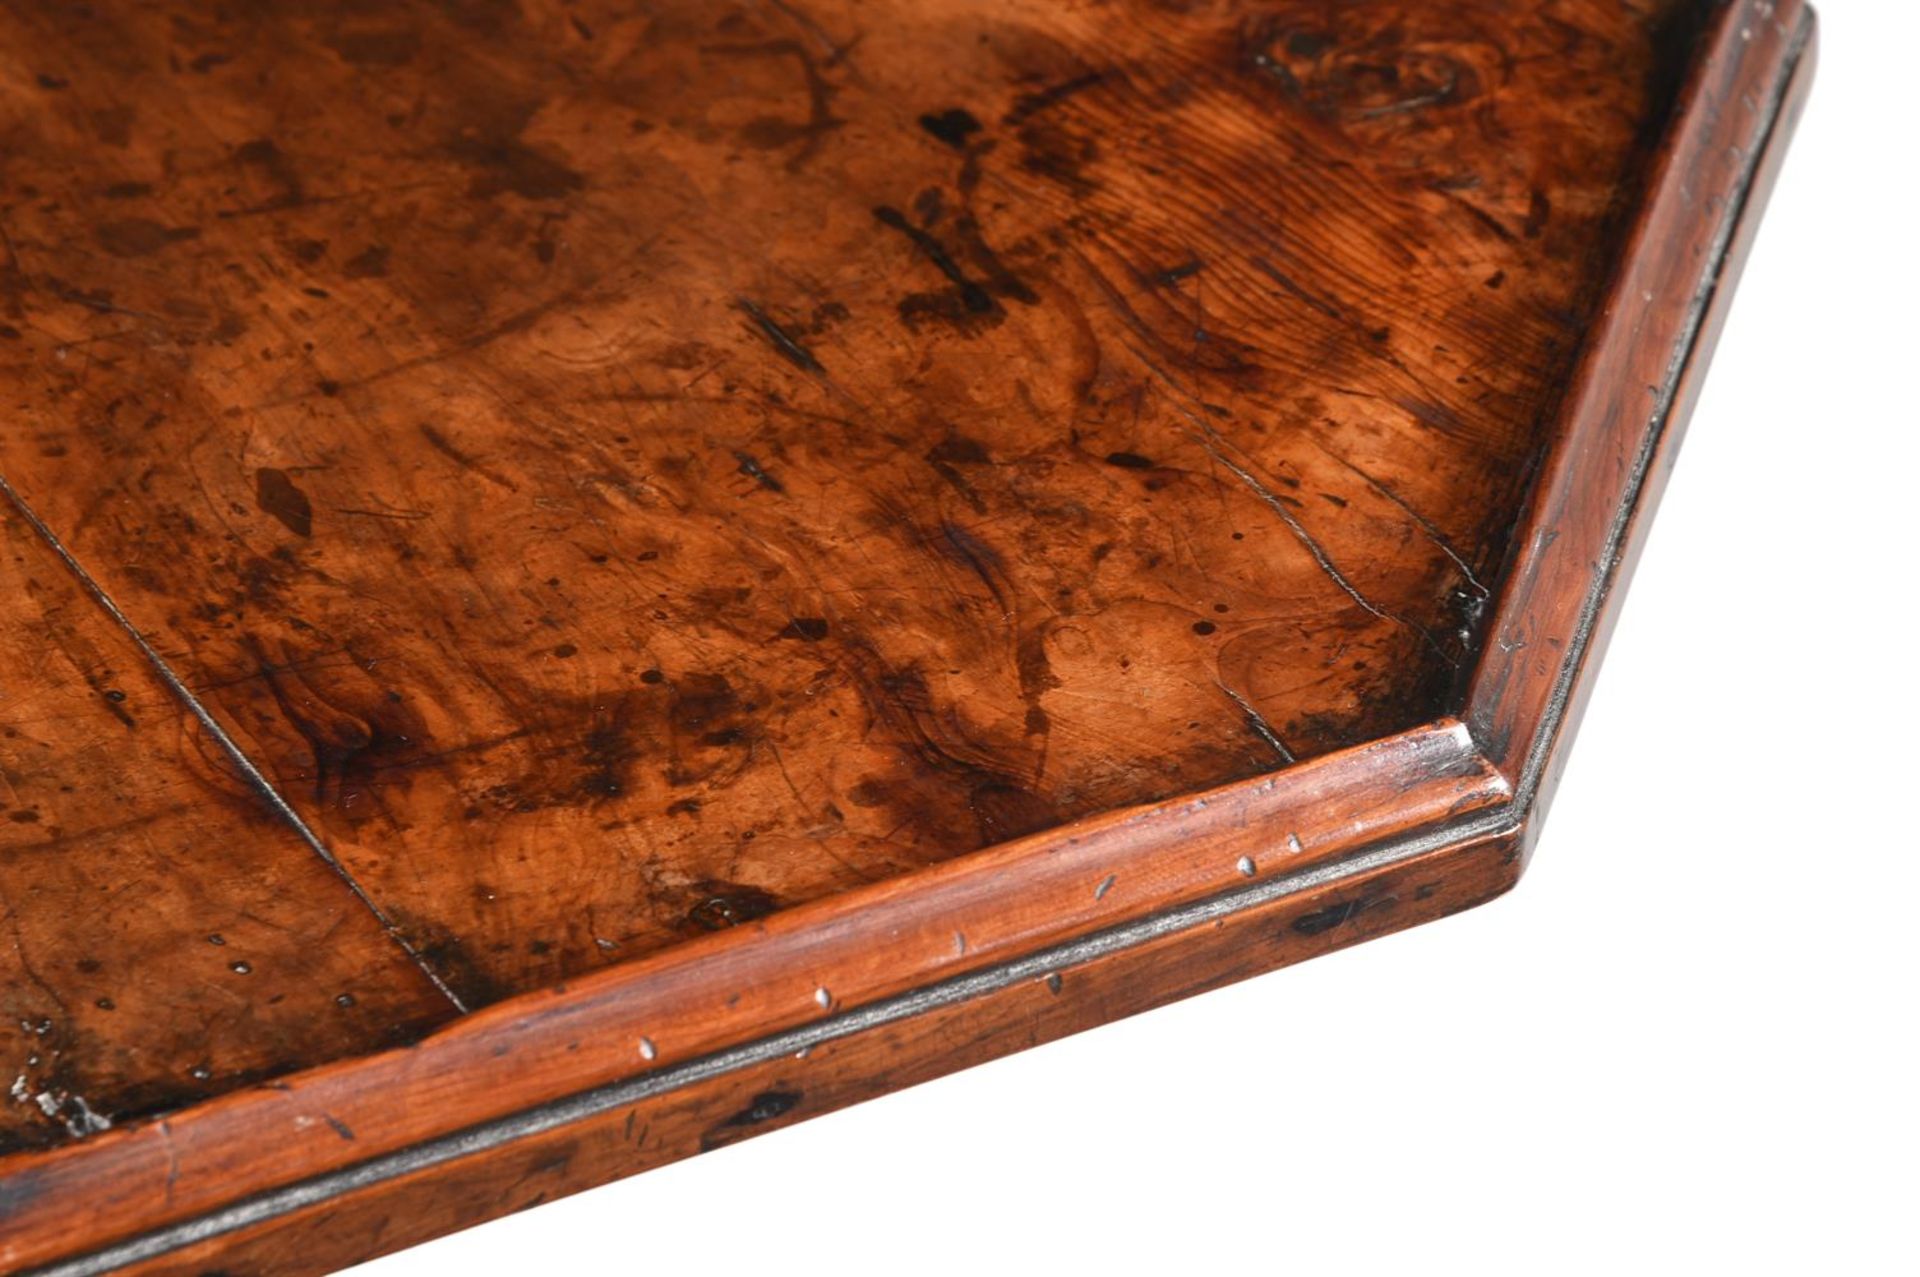 A GEORGE II YEW WOOD OCTAGONAL TRIPOD TABLE, LATE 18TH/EARLY 19TH CENTURY - Image 3 of 4